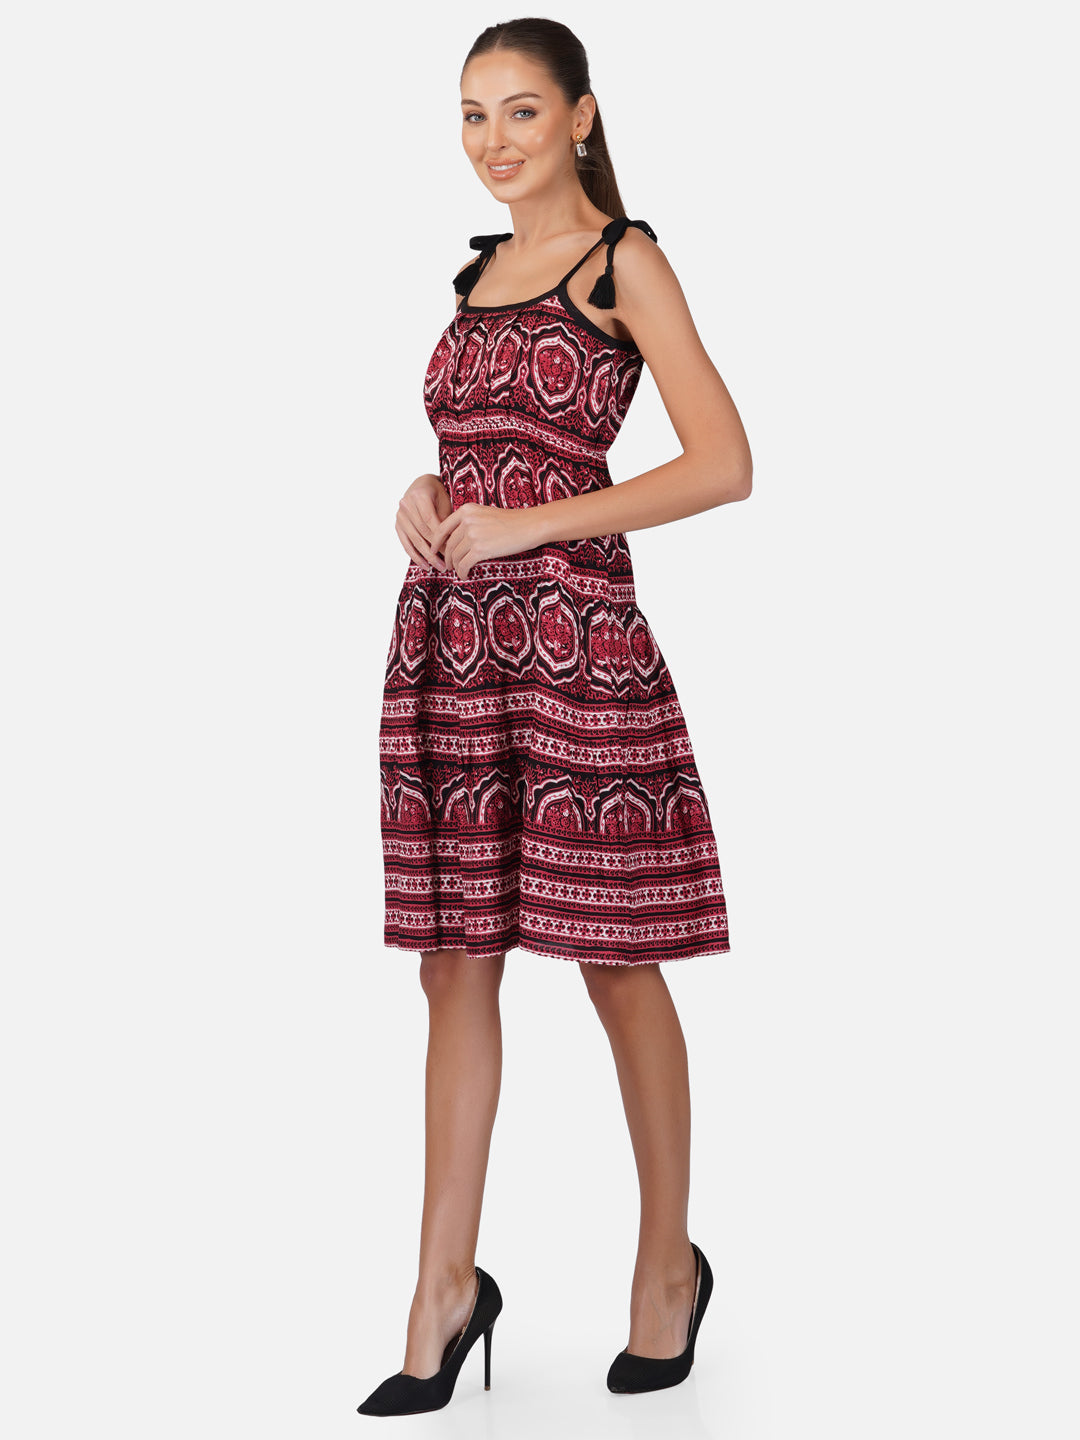 Porsorte Womens Red Rayon Printed Tie Up Strappy Casual Dress